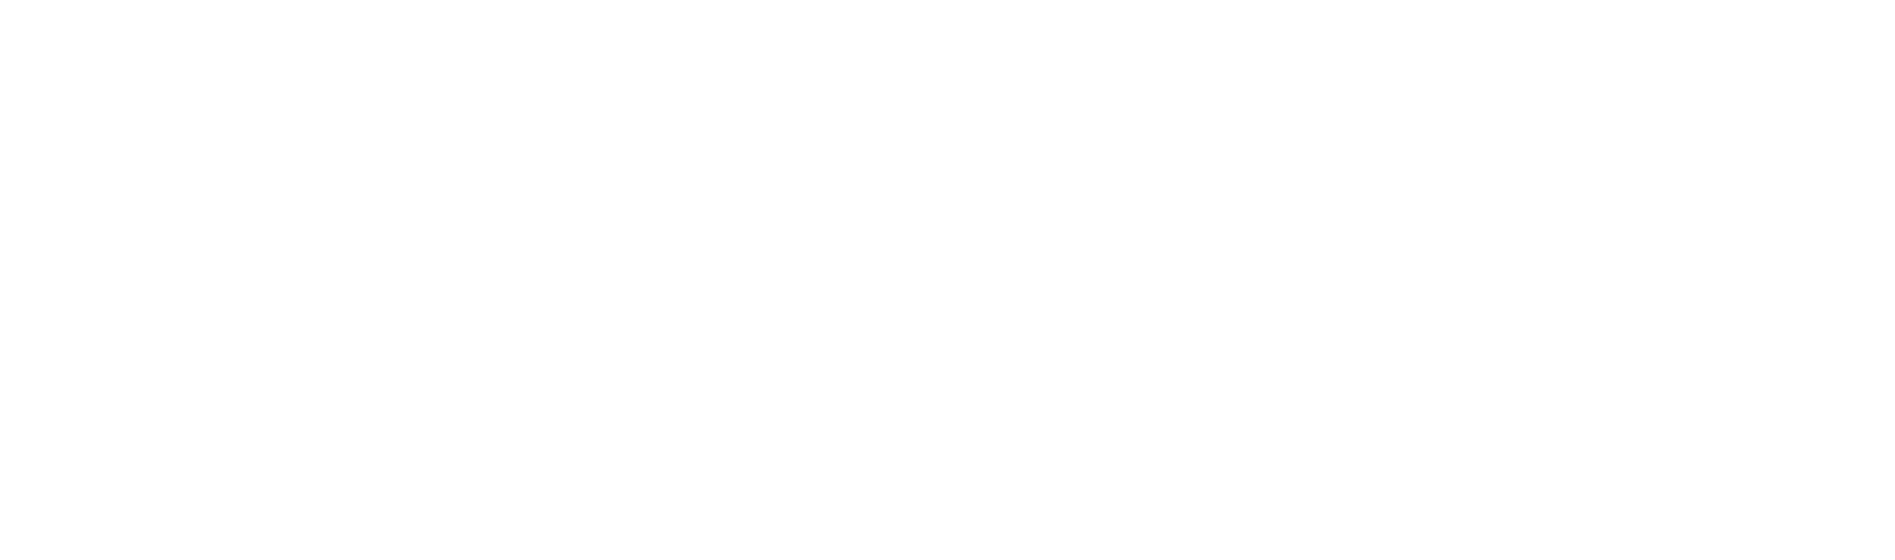 Inside Engineering & Consulting